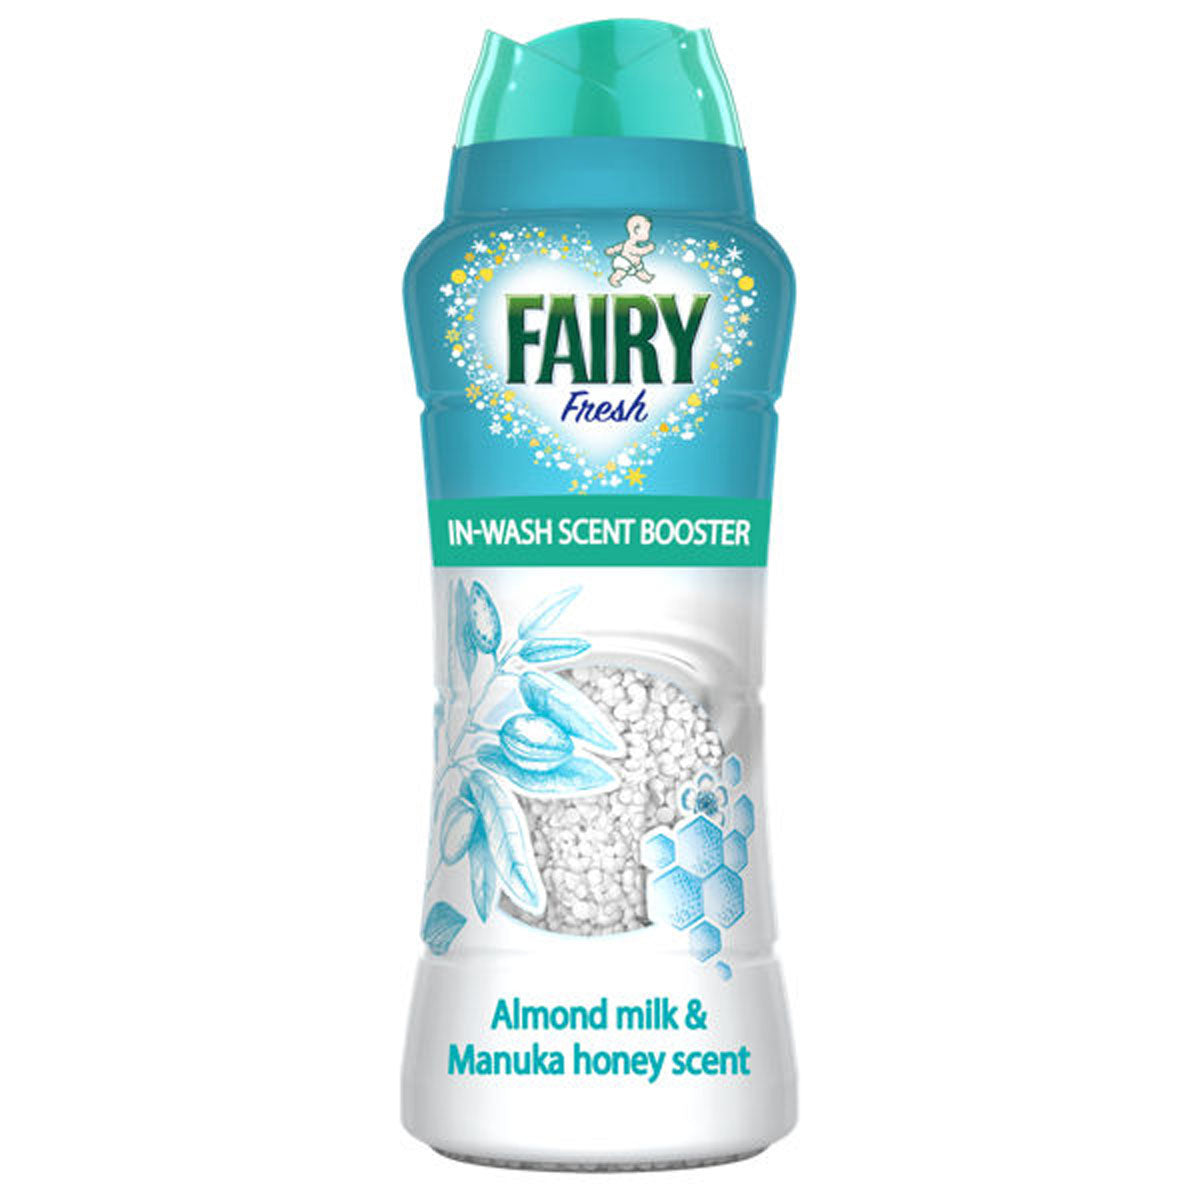 Fairy - Beads Non Bio In-Wash Scent Booster - 570g - Continental Food Store